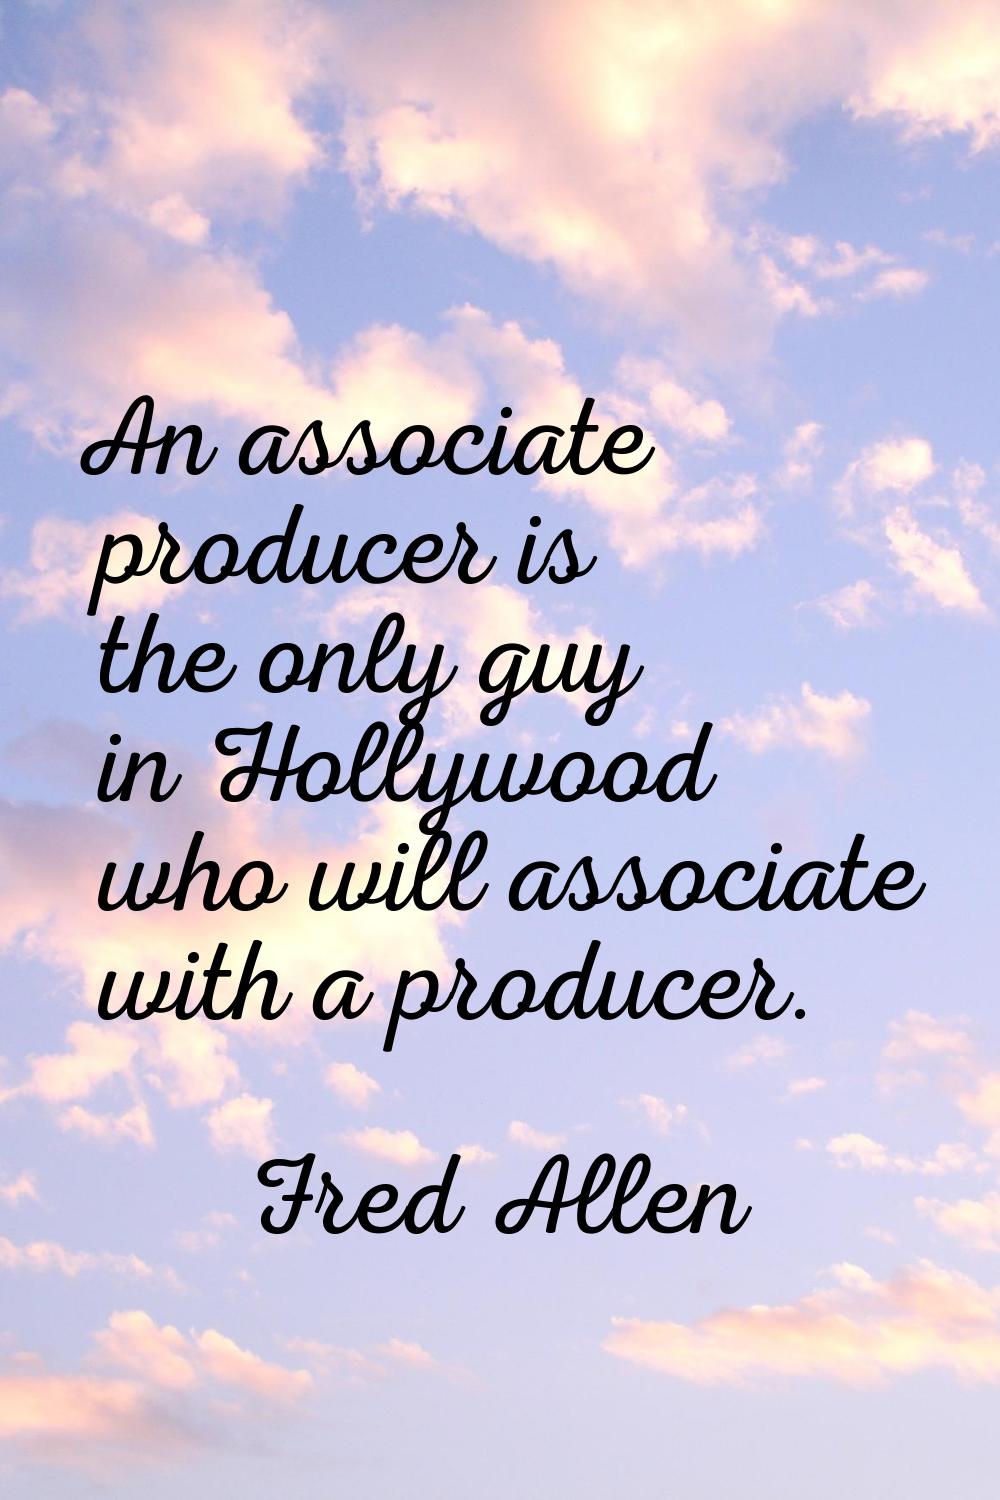 An associate producer is the only guy in Hollywood who will associate with a producer.